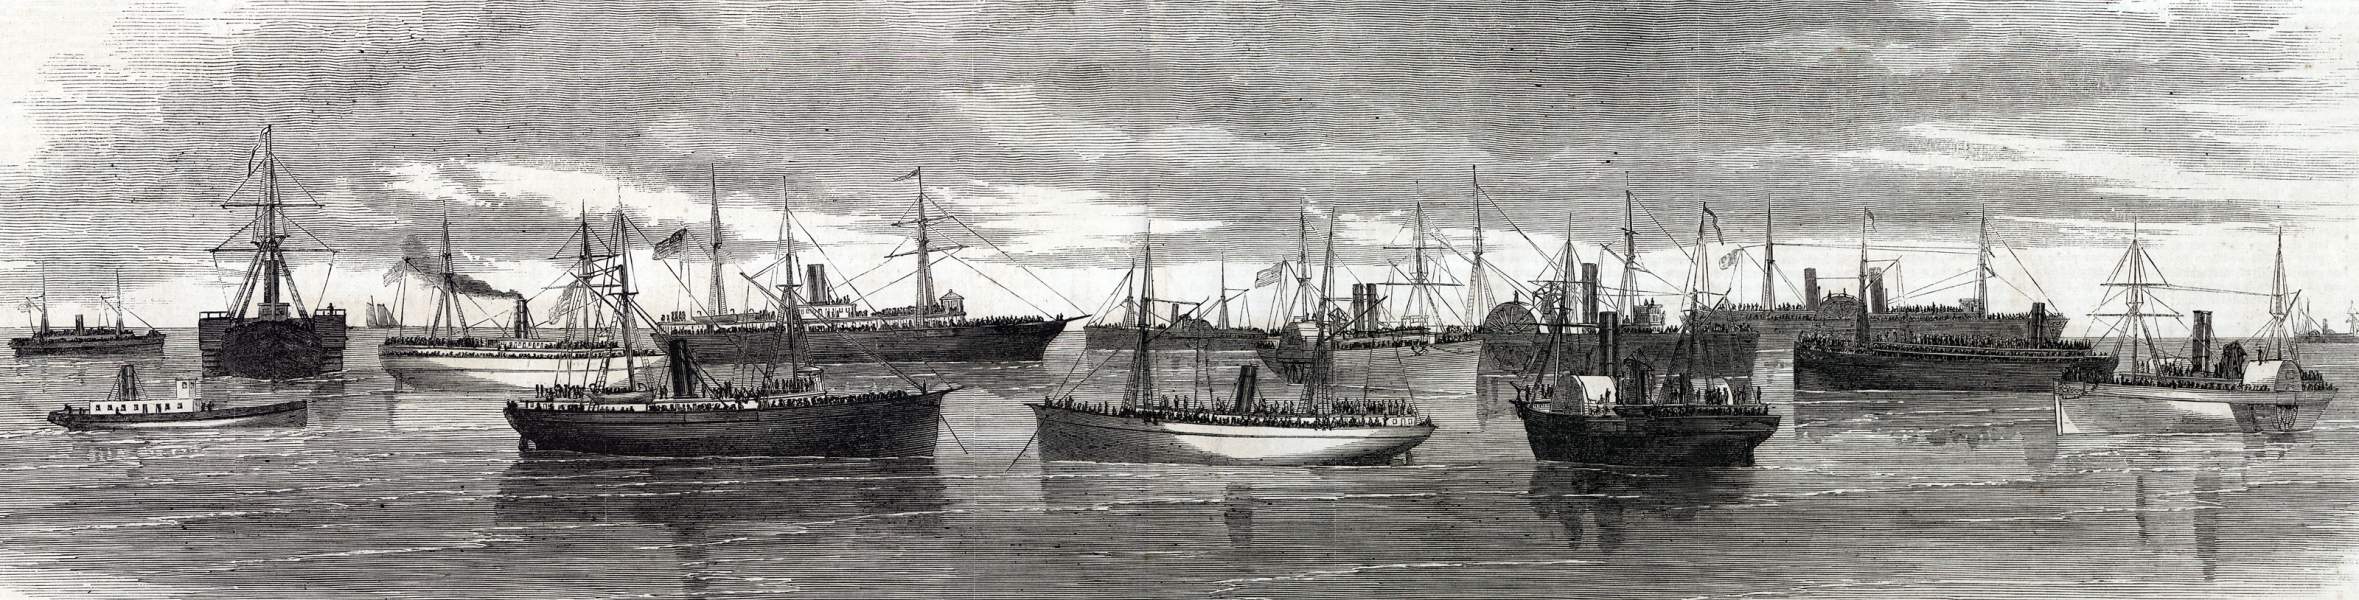 Embarkation of troops aboard transports, Hampton Roads, Virginia, December 12, 1864, artist's impression, zoomable image